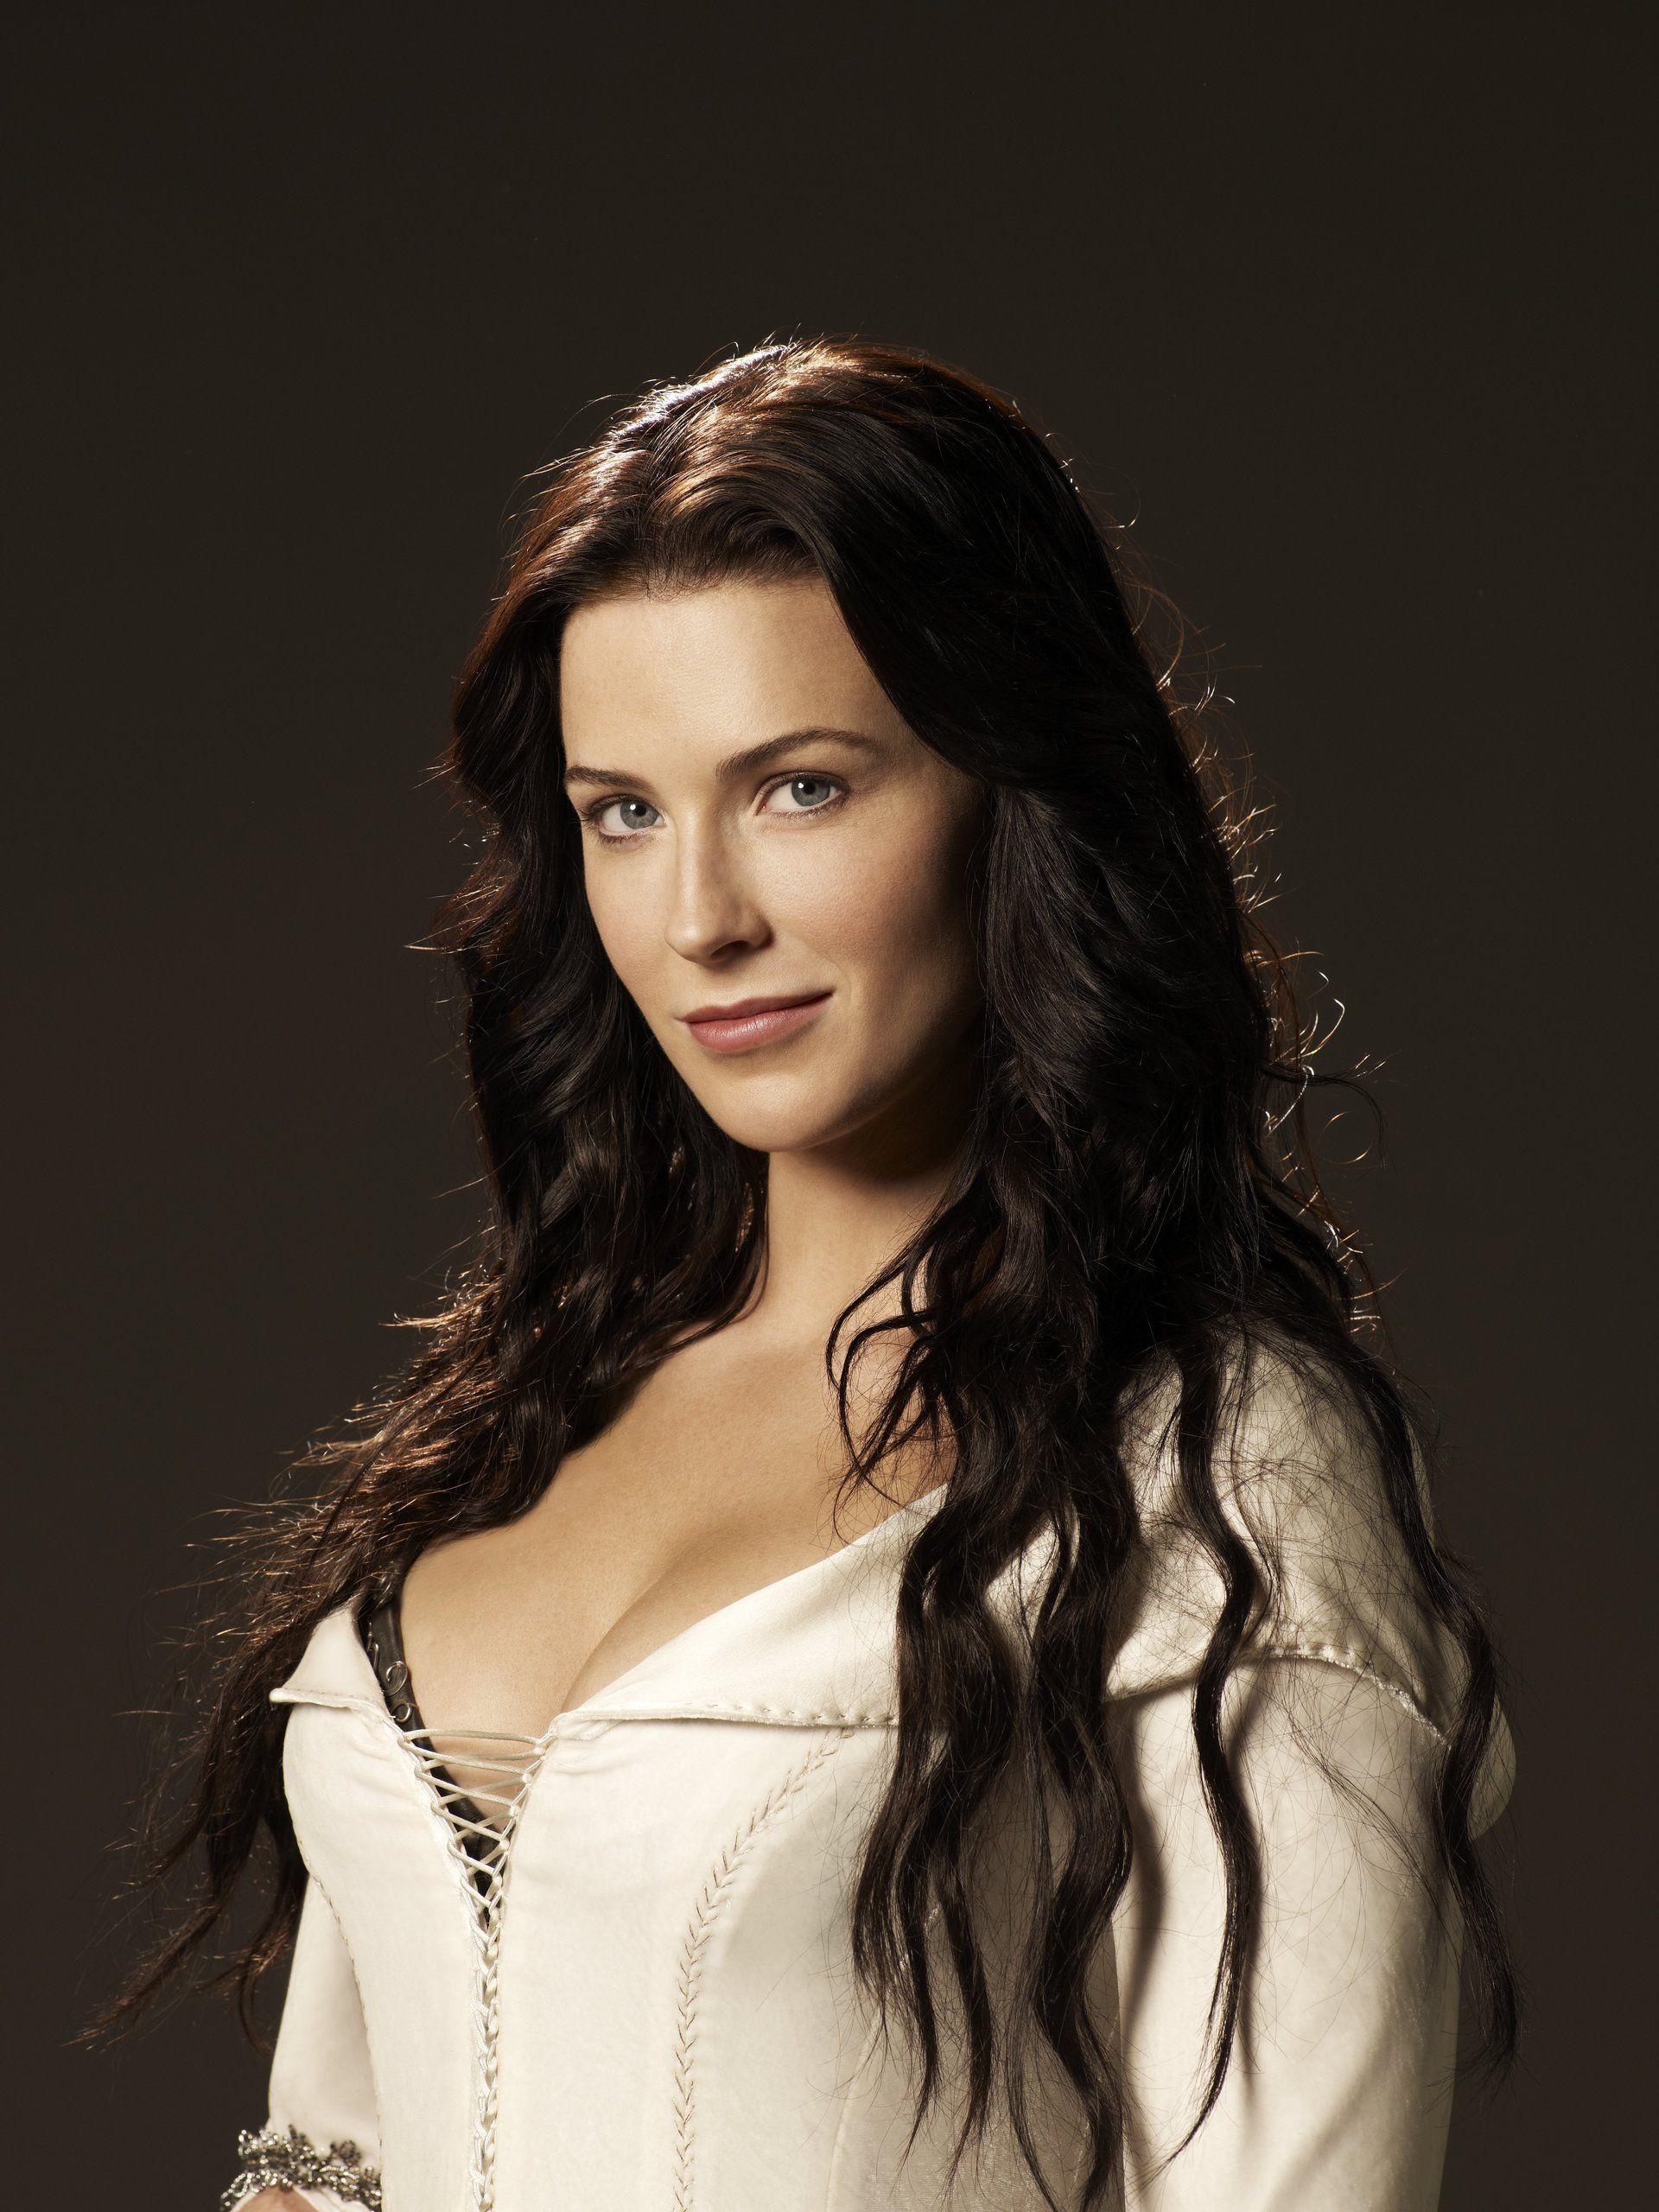 51 Hottest Bridget Regan Big Butt Pictures Will Drive You Wildly Enchanted With This Dashing Damsel 531